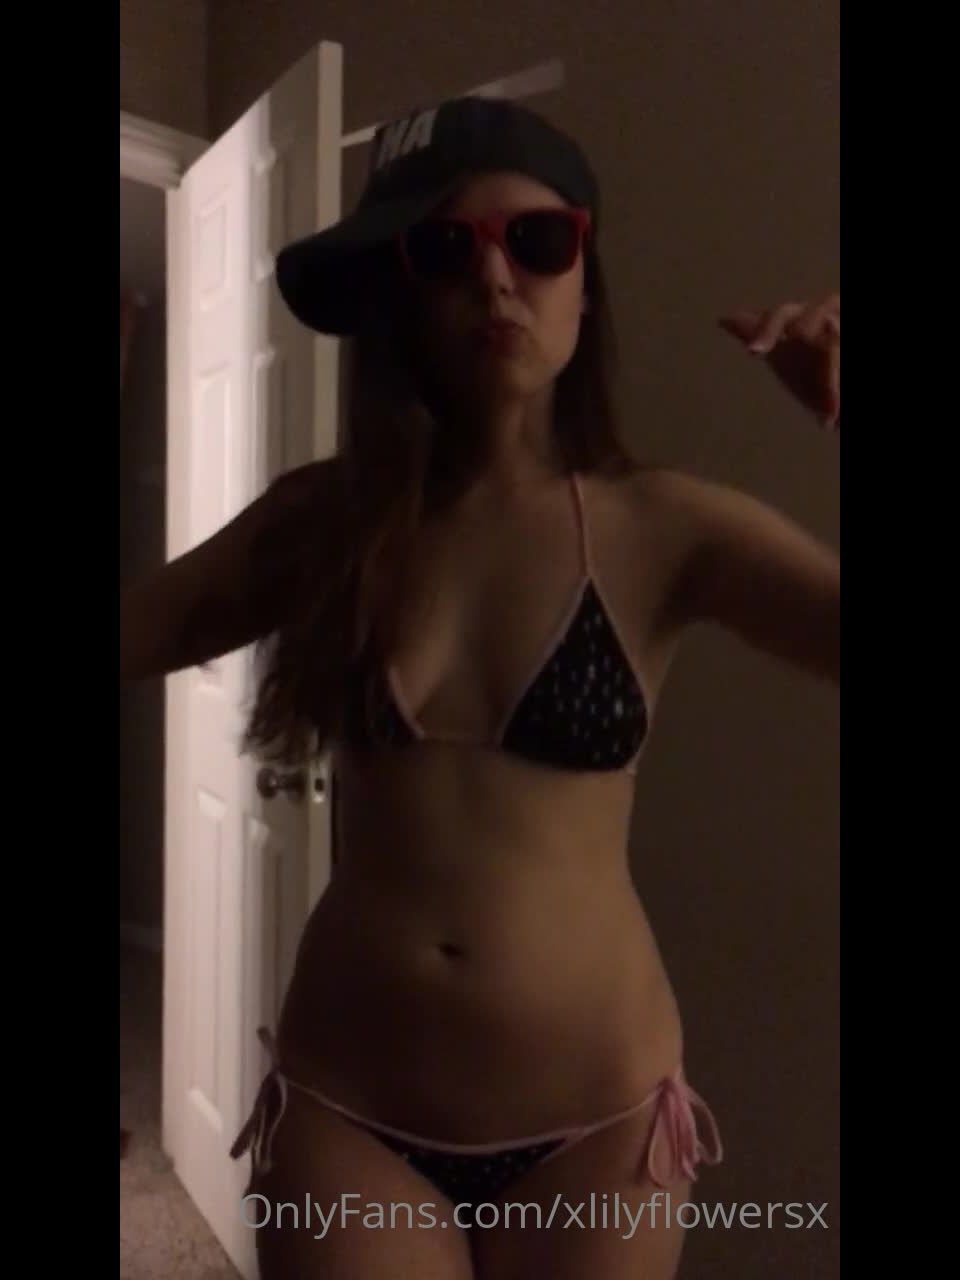 Lily Flowers - xlilyflowersx () Xlilyflowersx - throwback to being a dork and wearing my sunglasses at night 29-07-2021